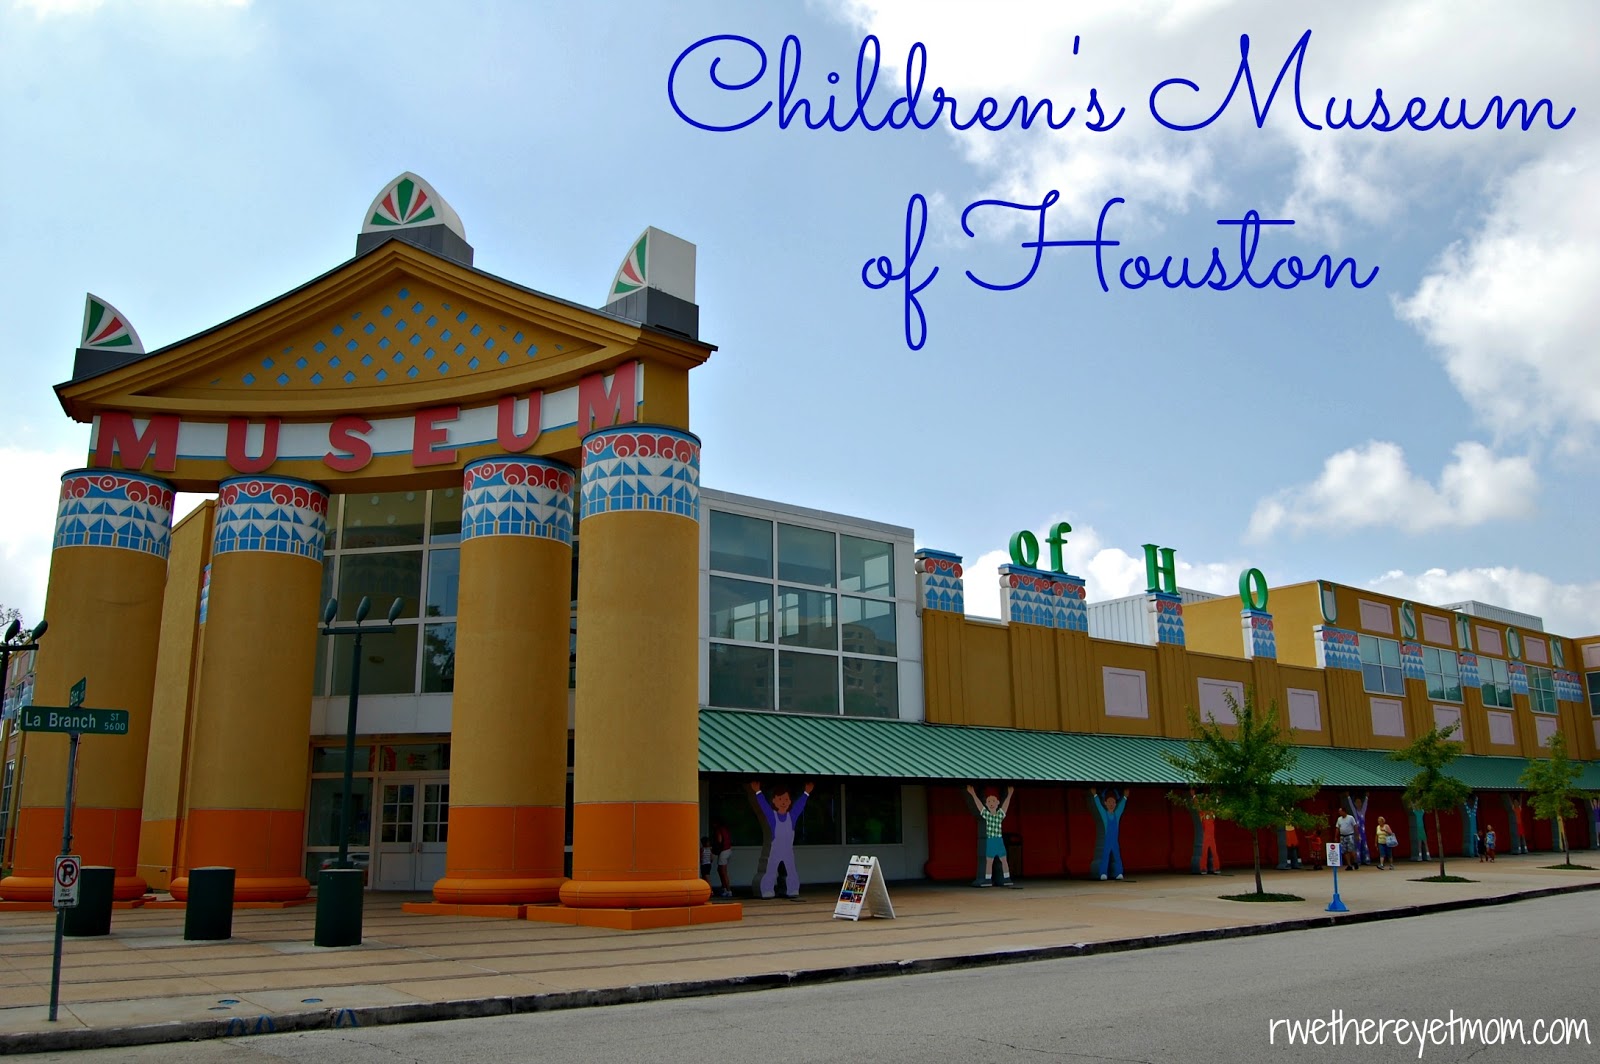 Childrens Museum Of Houston Houston Tx R We There Yet Mom